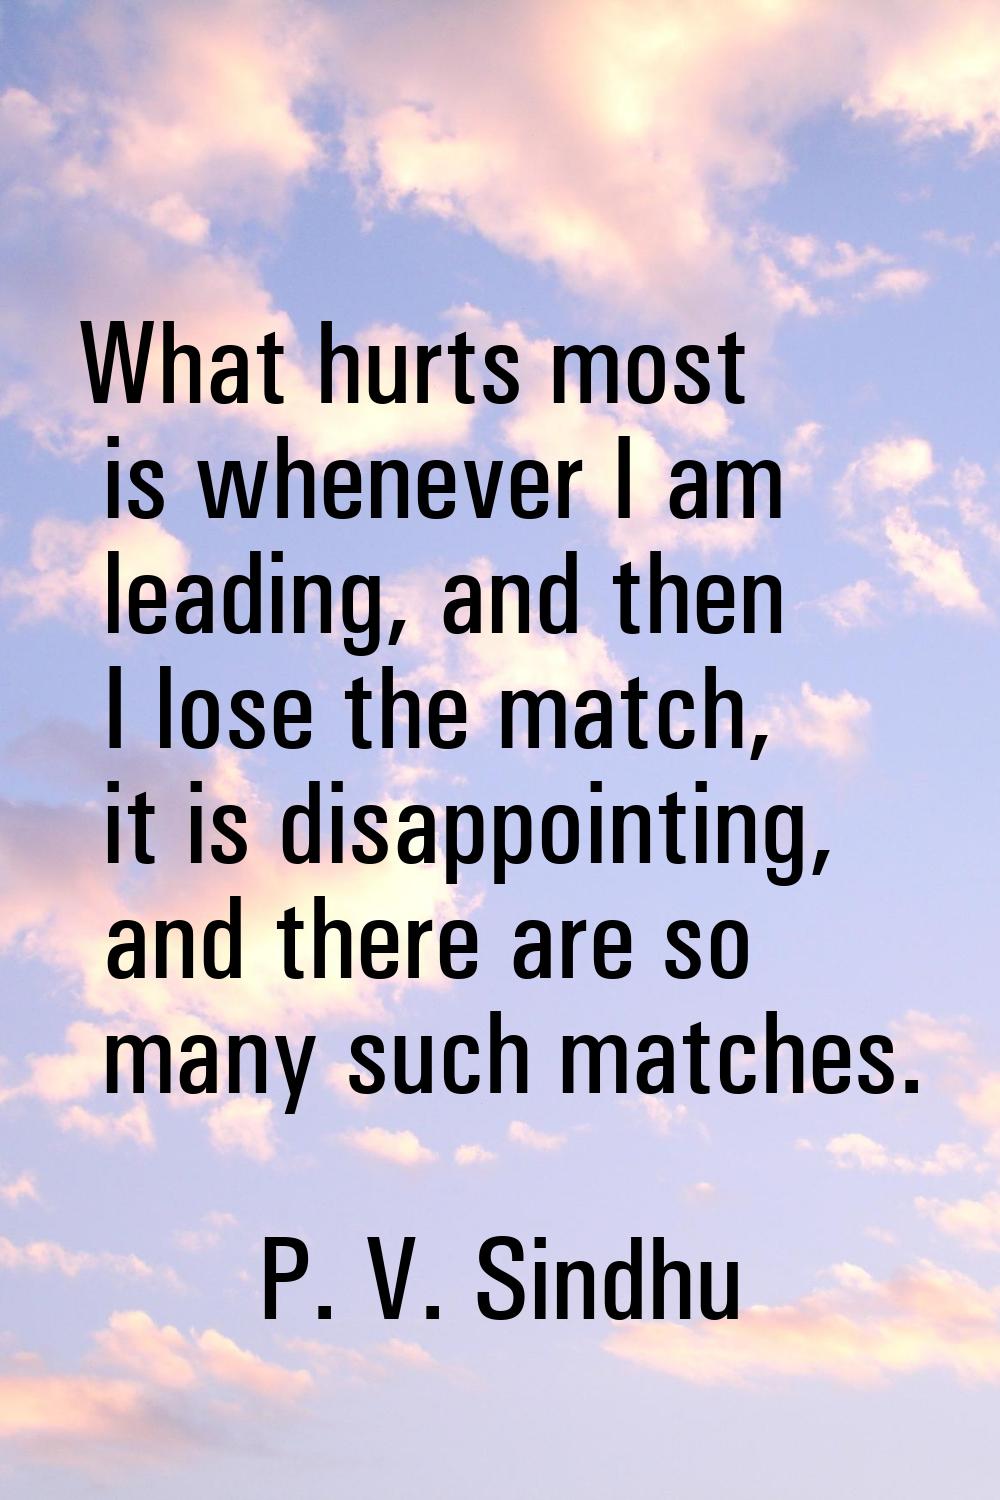 What hurts most is whenever I am leading, and then I lose the match, it is disappointing, and there